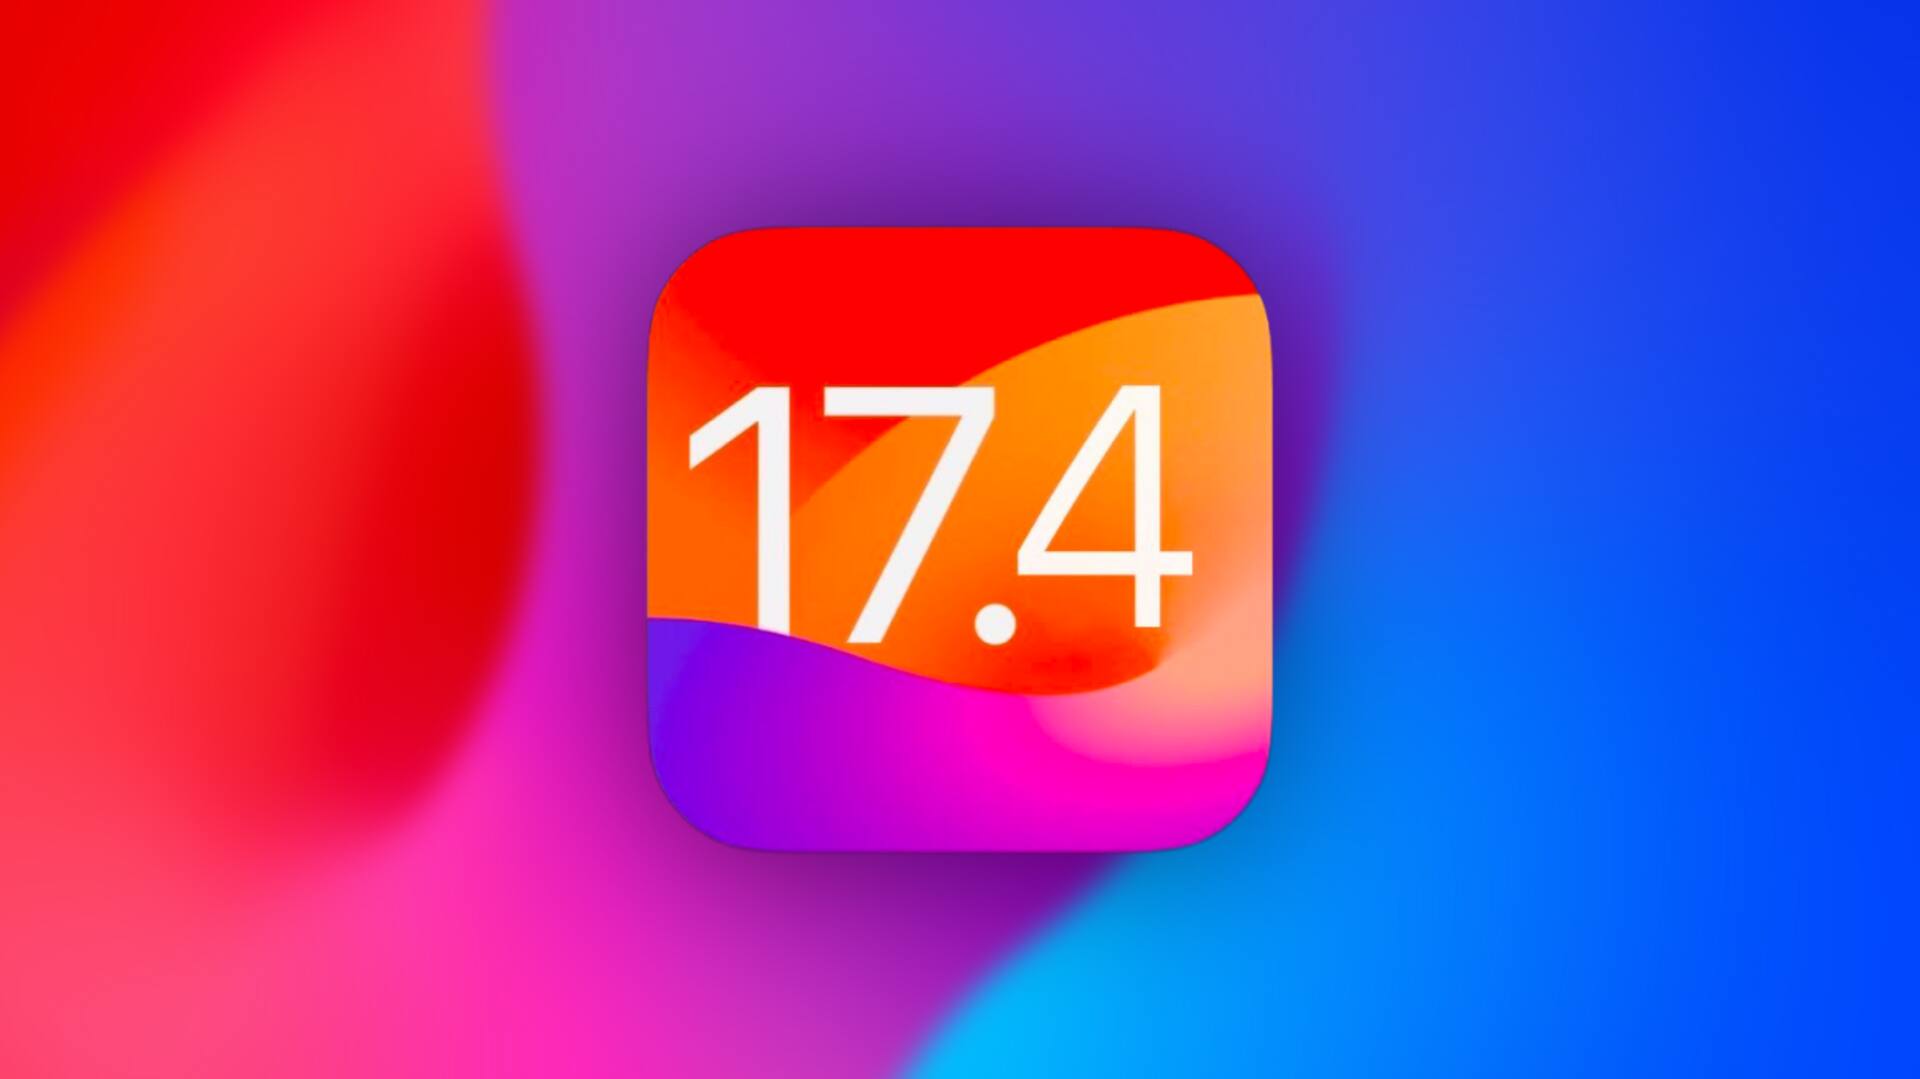 Apple releases iOS 17.4 with major changes for EU users